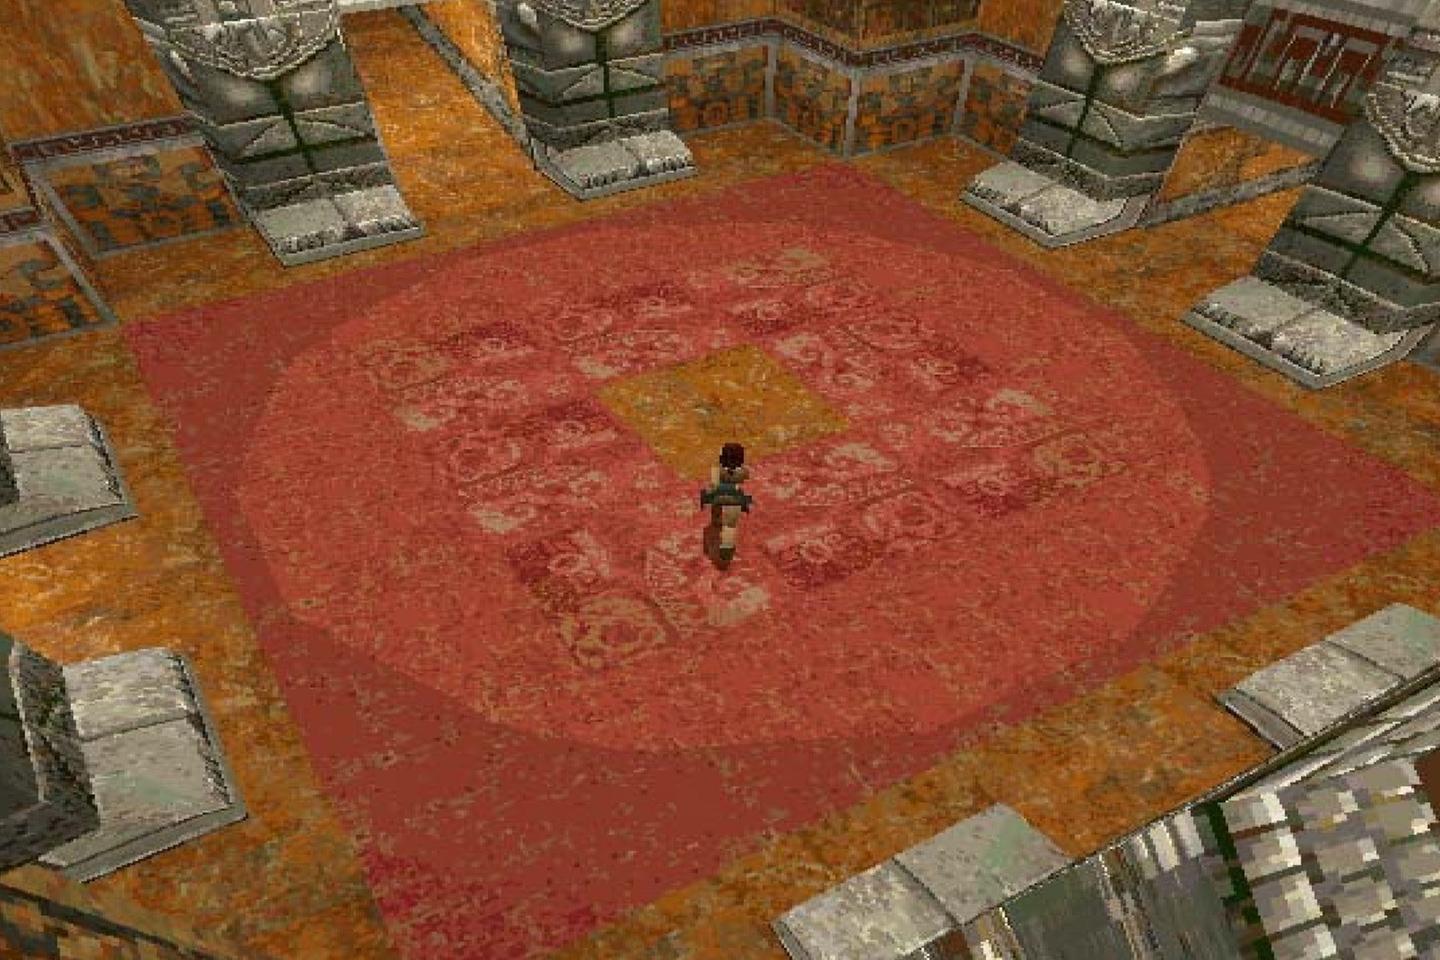 Lara standing in large red circle in middle of tomb